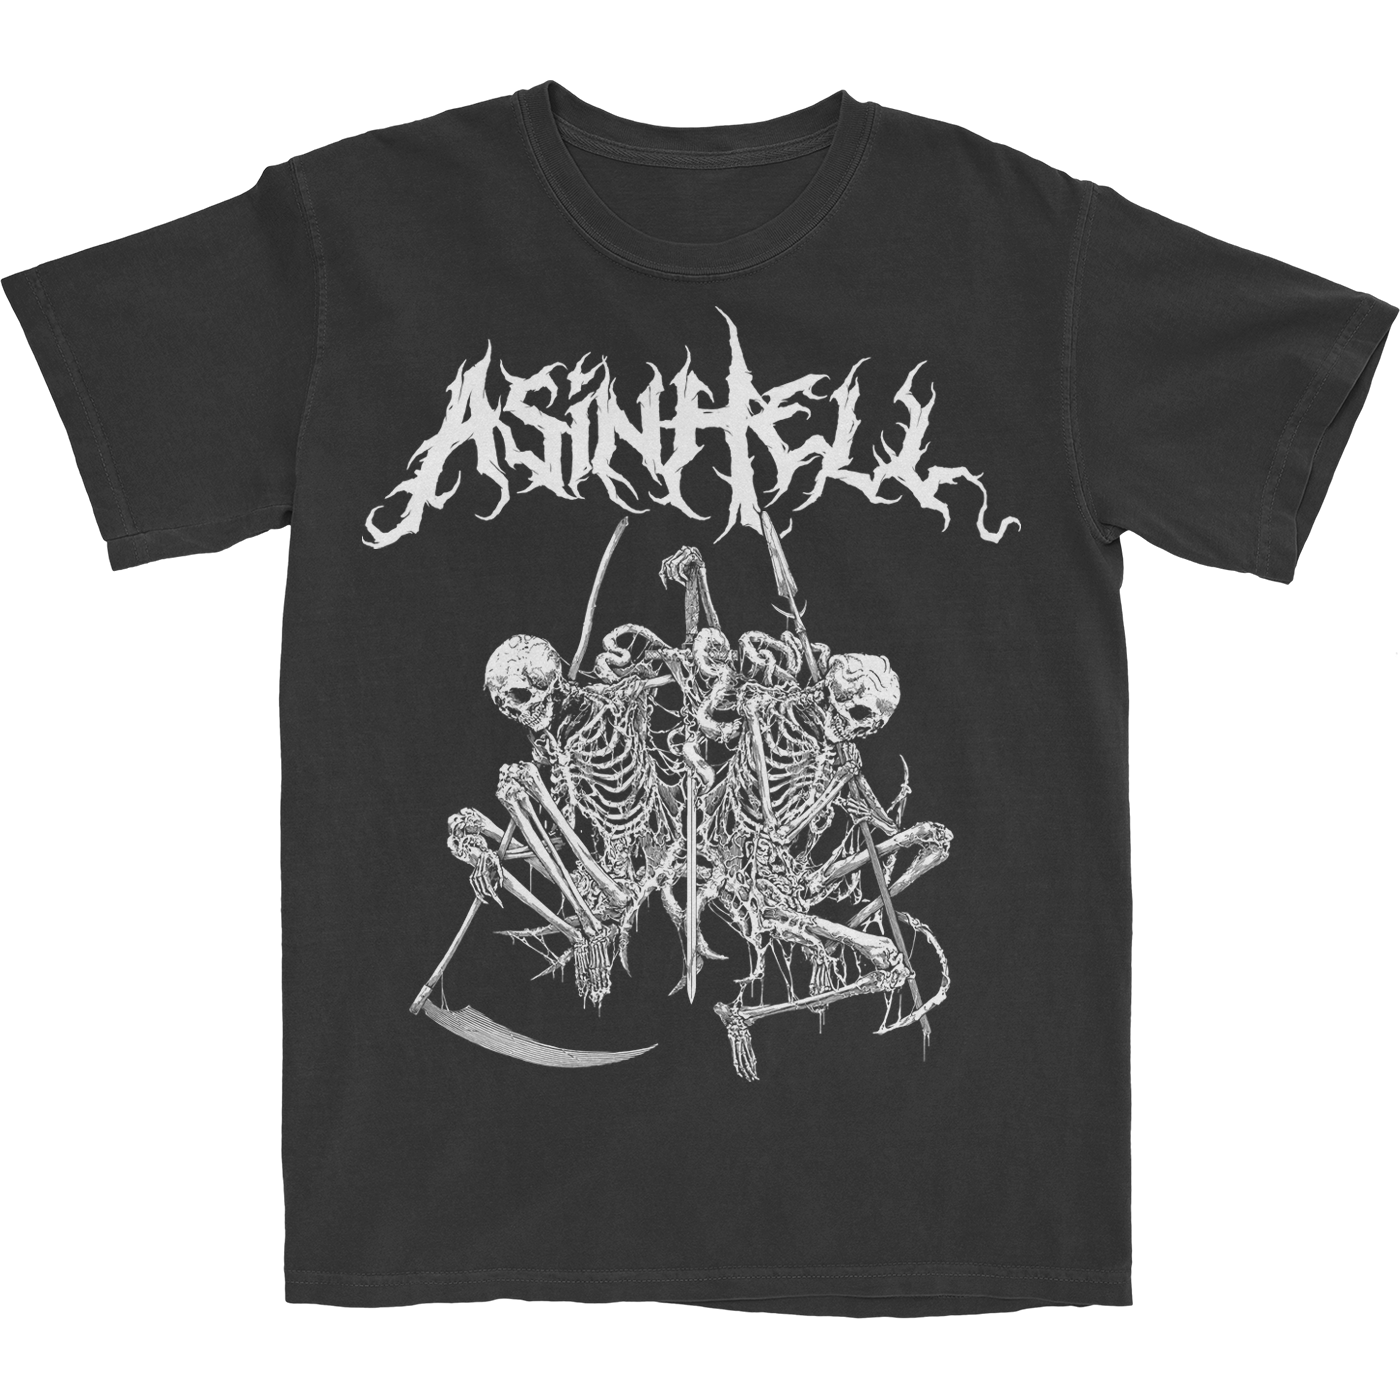 As In Hell Skeletons T-Shirt